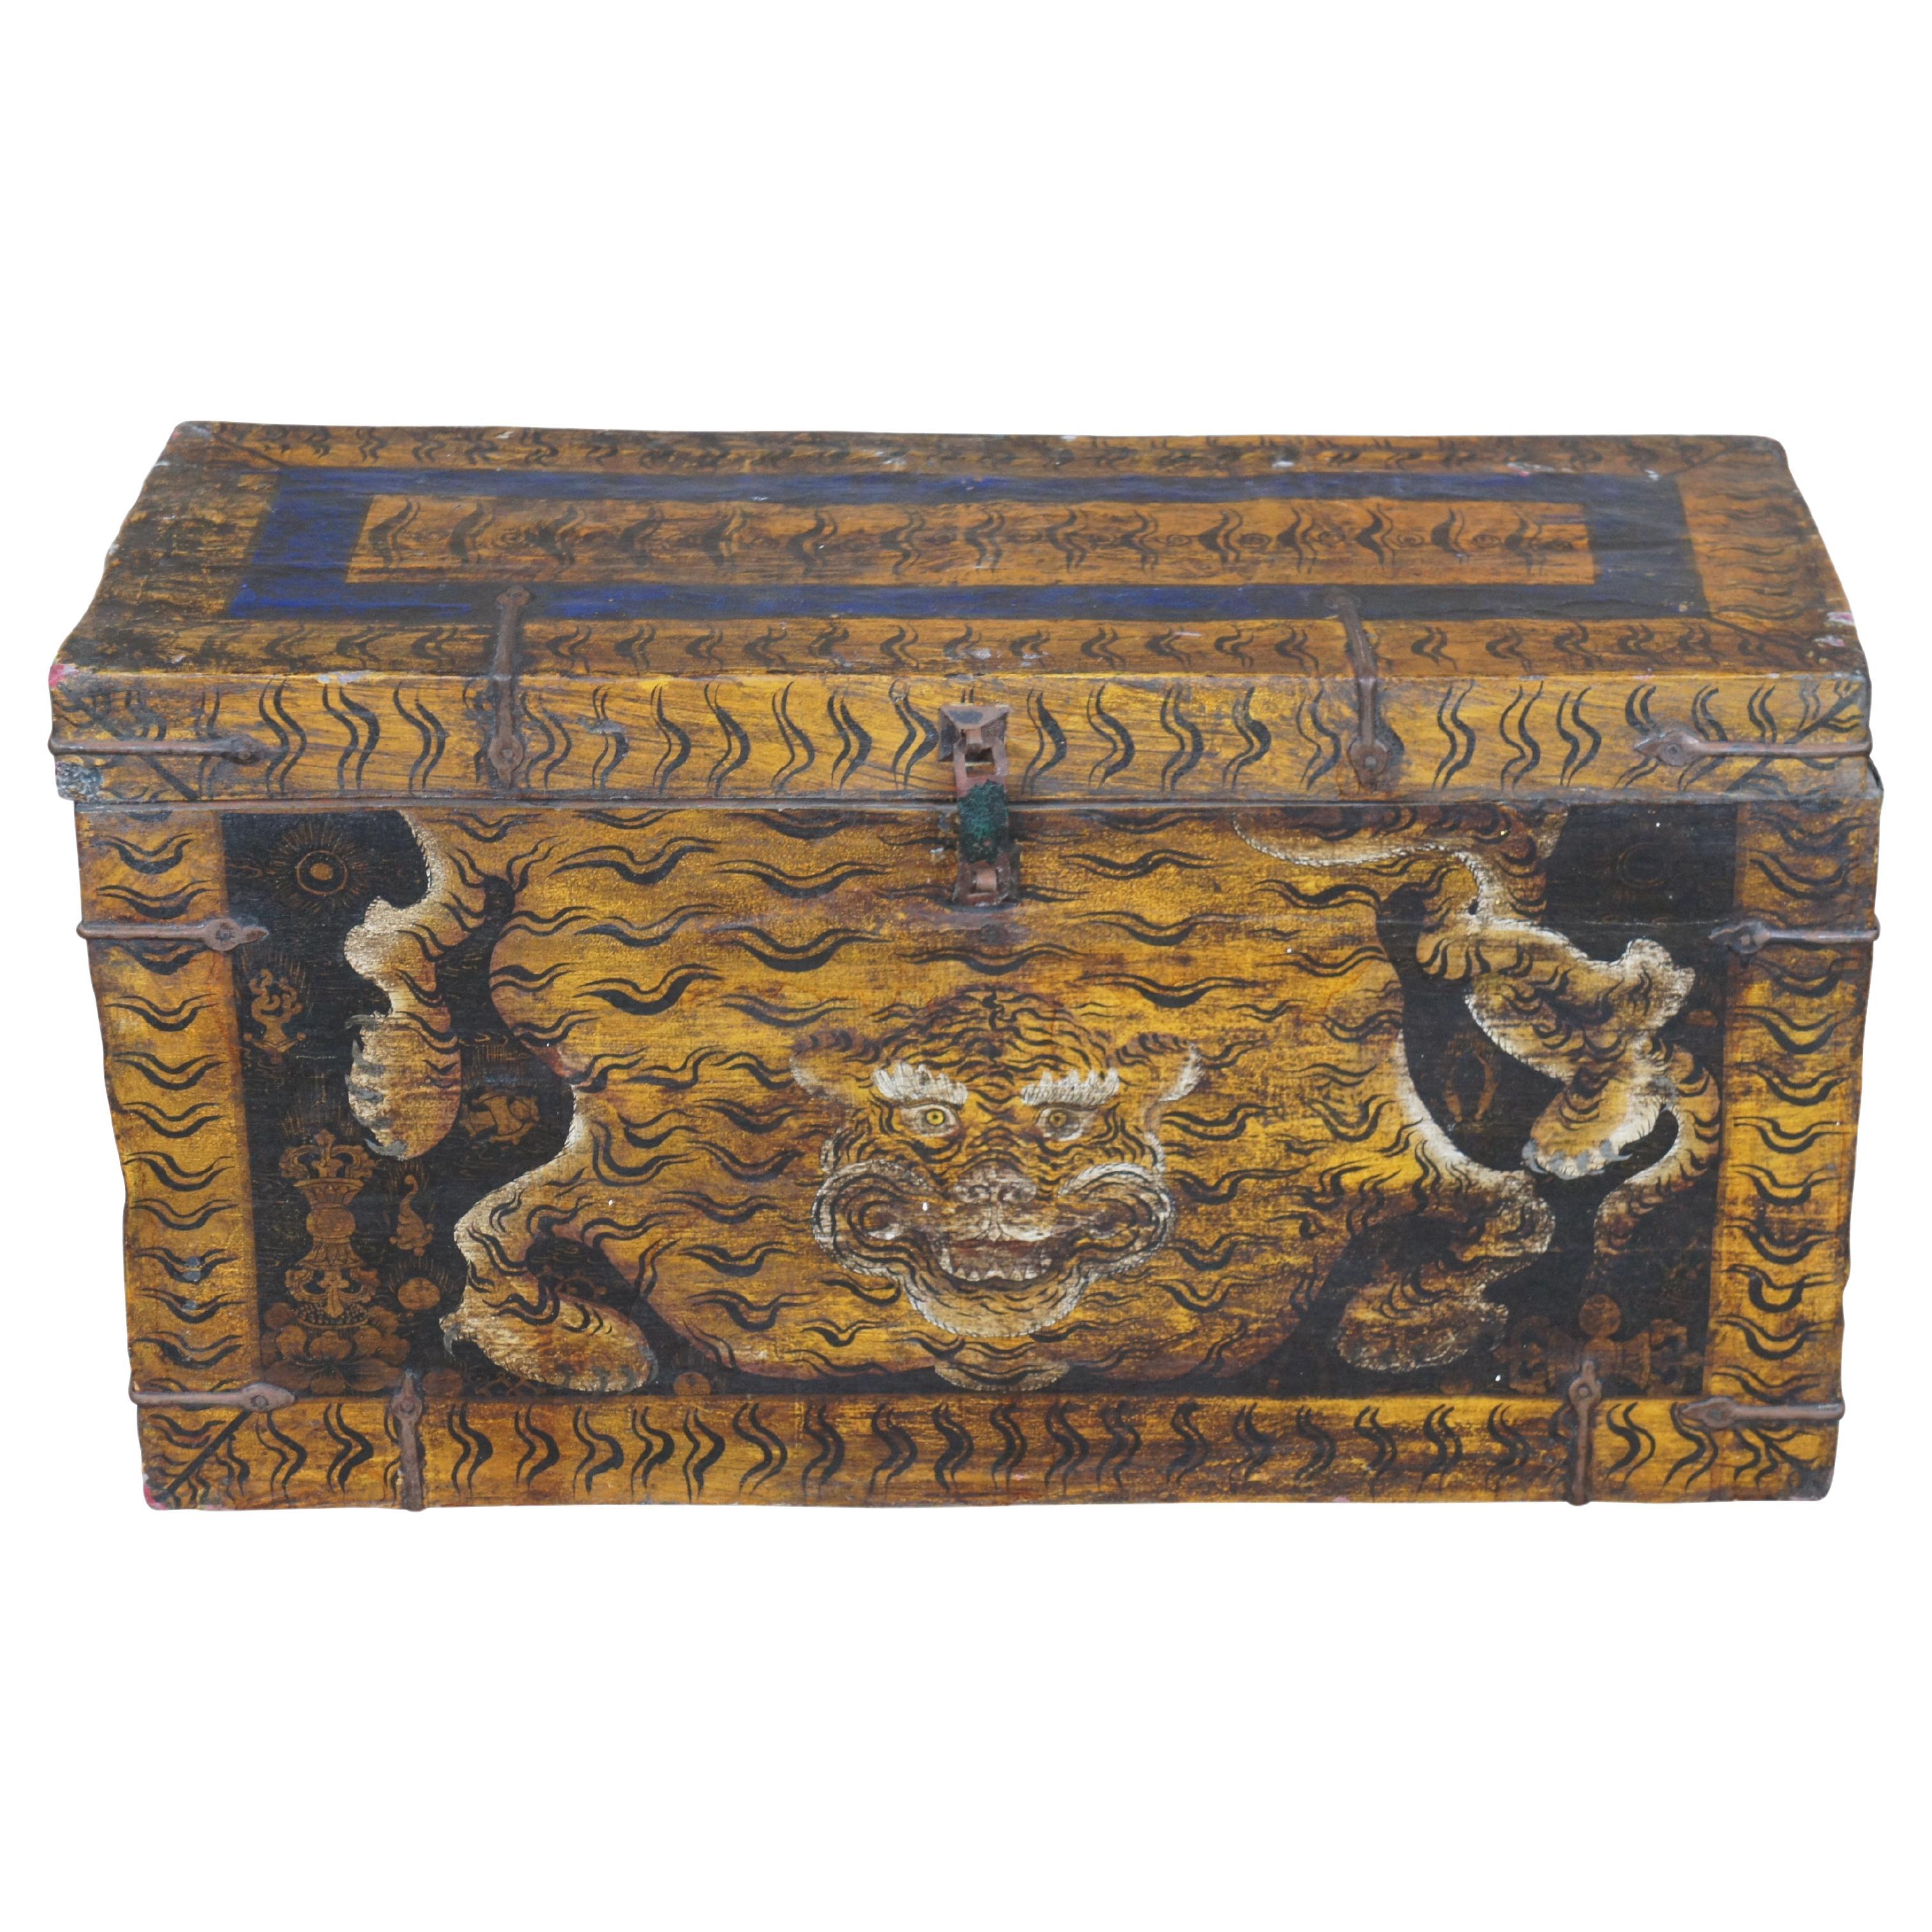 Rare Antique Hand Painted Tibetan Lacquered Tiger Trunk Storage Blanket Chest